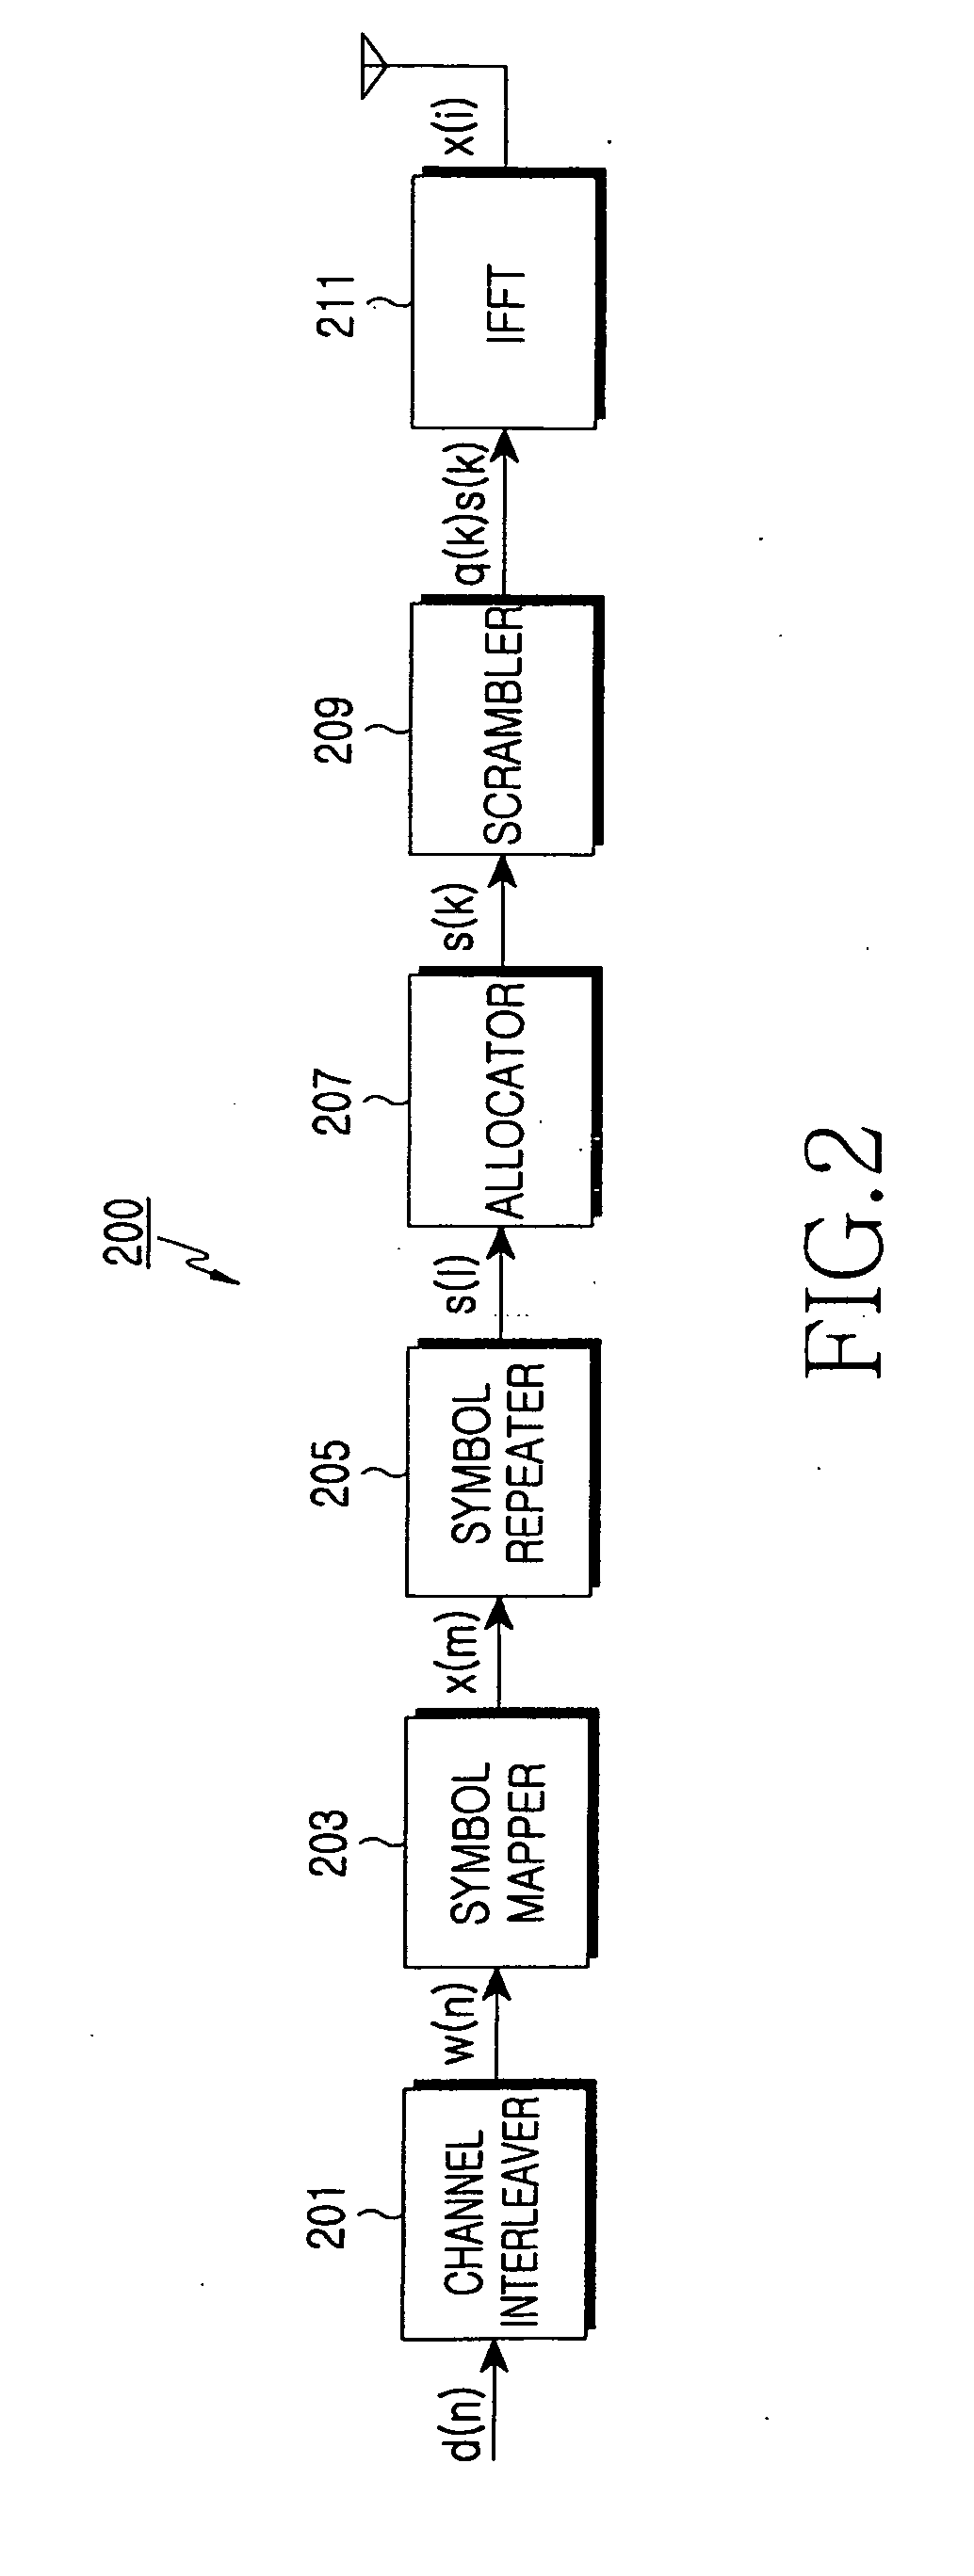 Method and apparatus for canceling neighbor cell interference signals in an orthogonal frequency division multiple access system